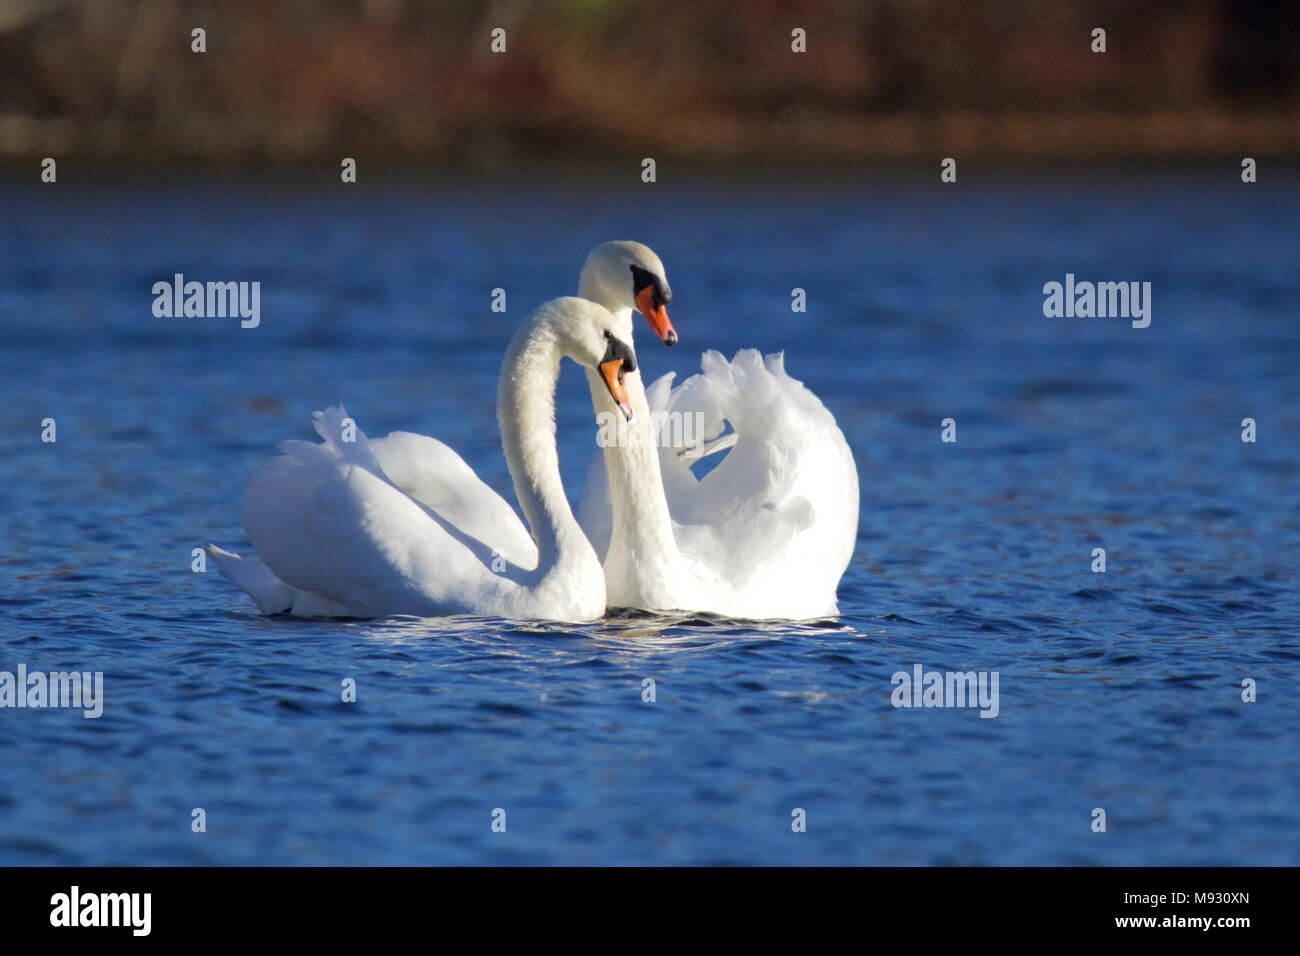 A pair of mute swans Cygnus olor swimming together on blue water Stock Photo